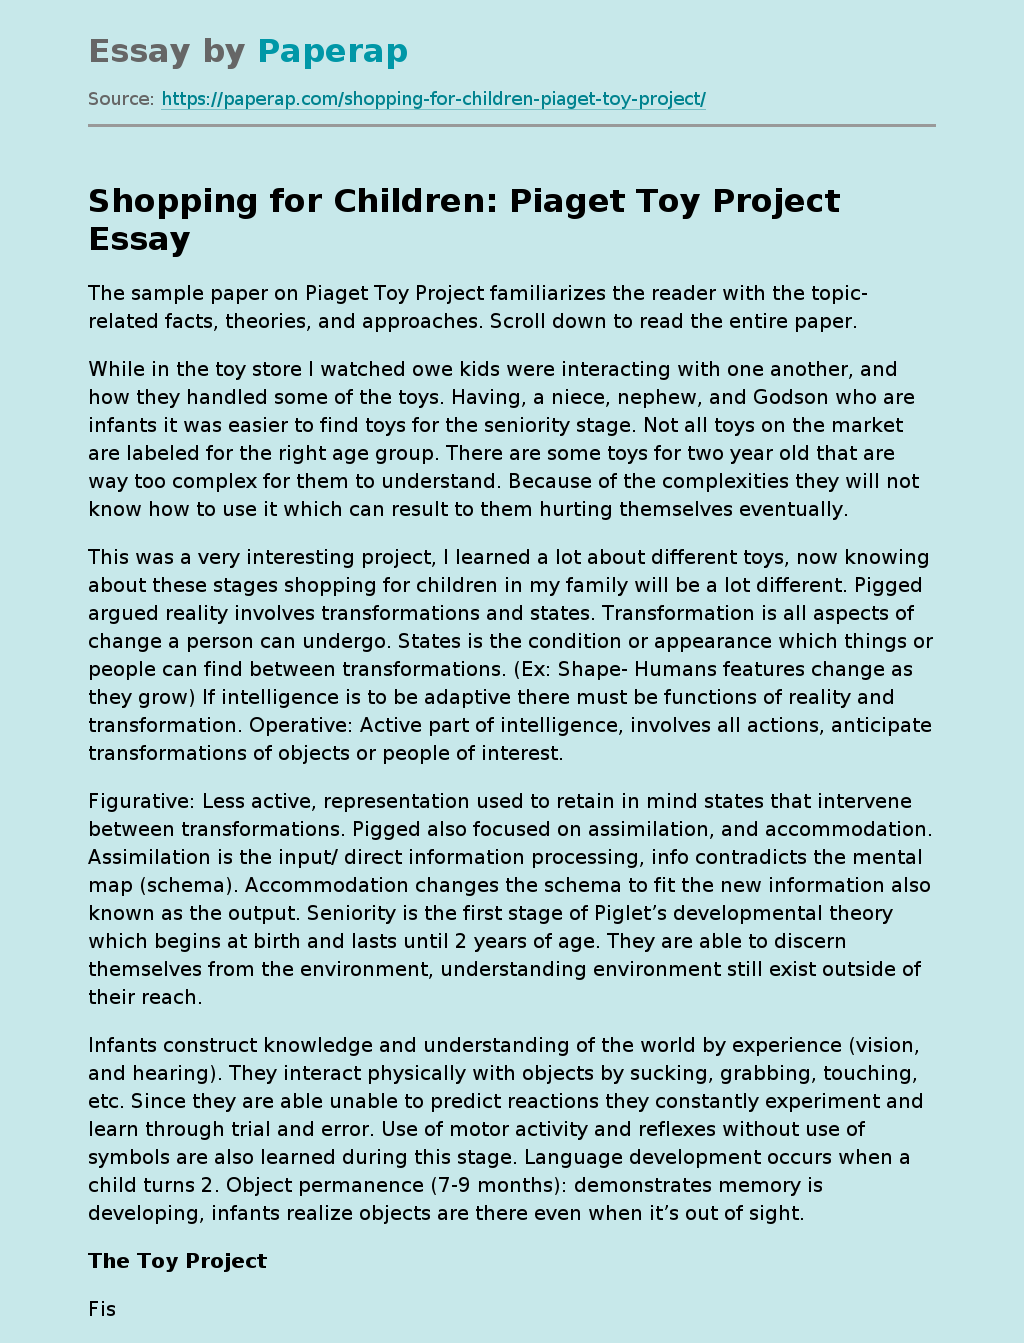 Shopping for Children: Piaget Toy Project